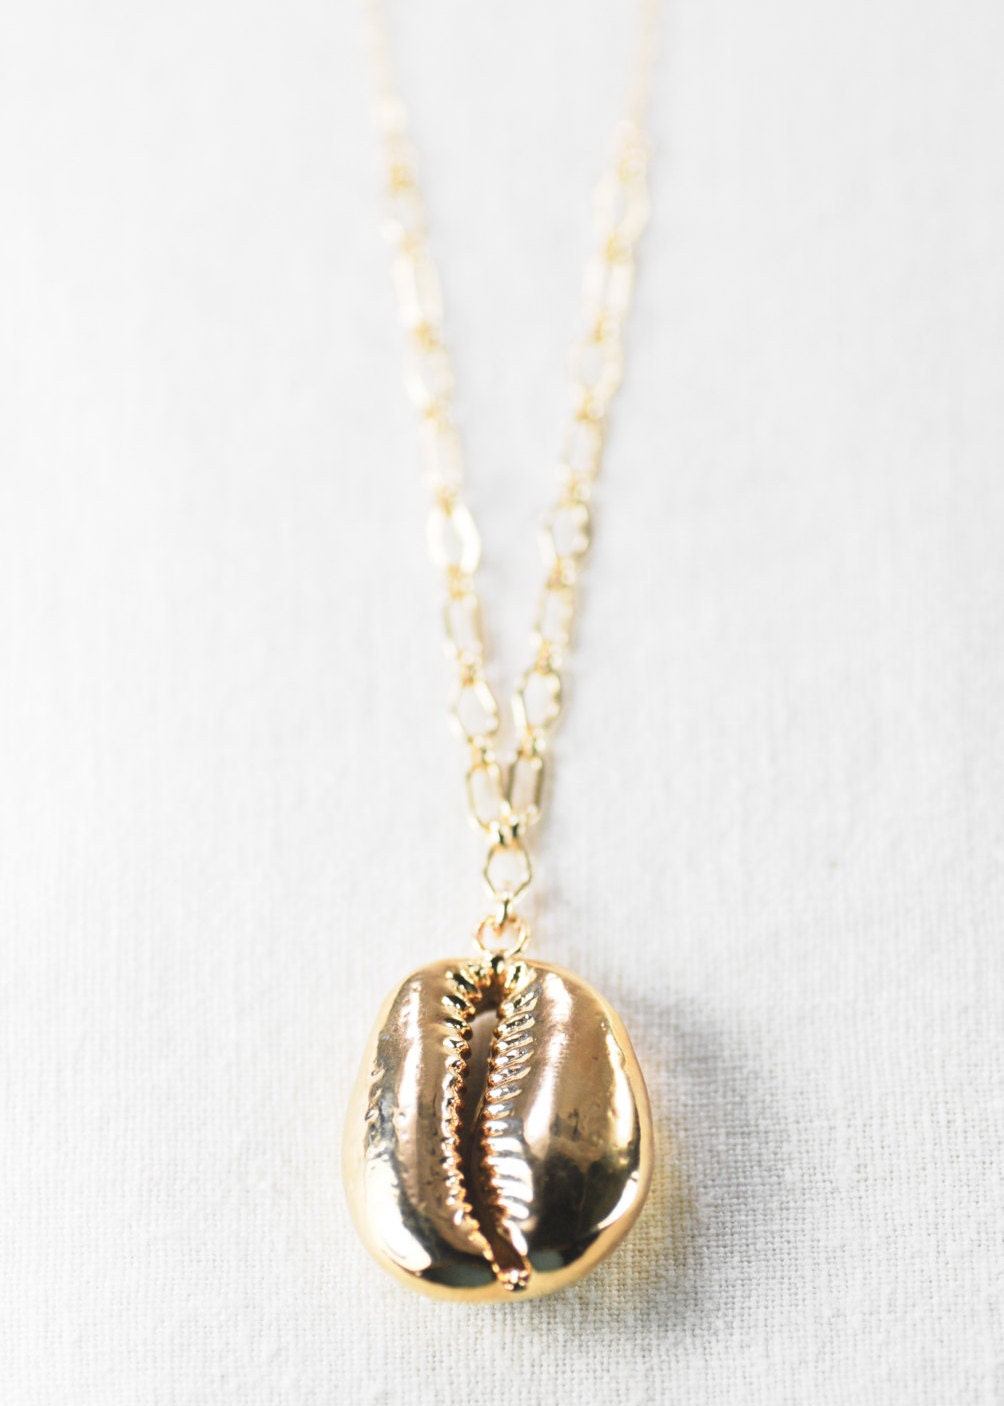 Kaleho necklace gold cowry shell necklace delicate shell